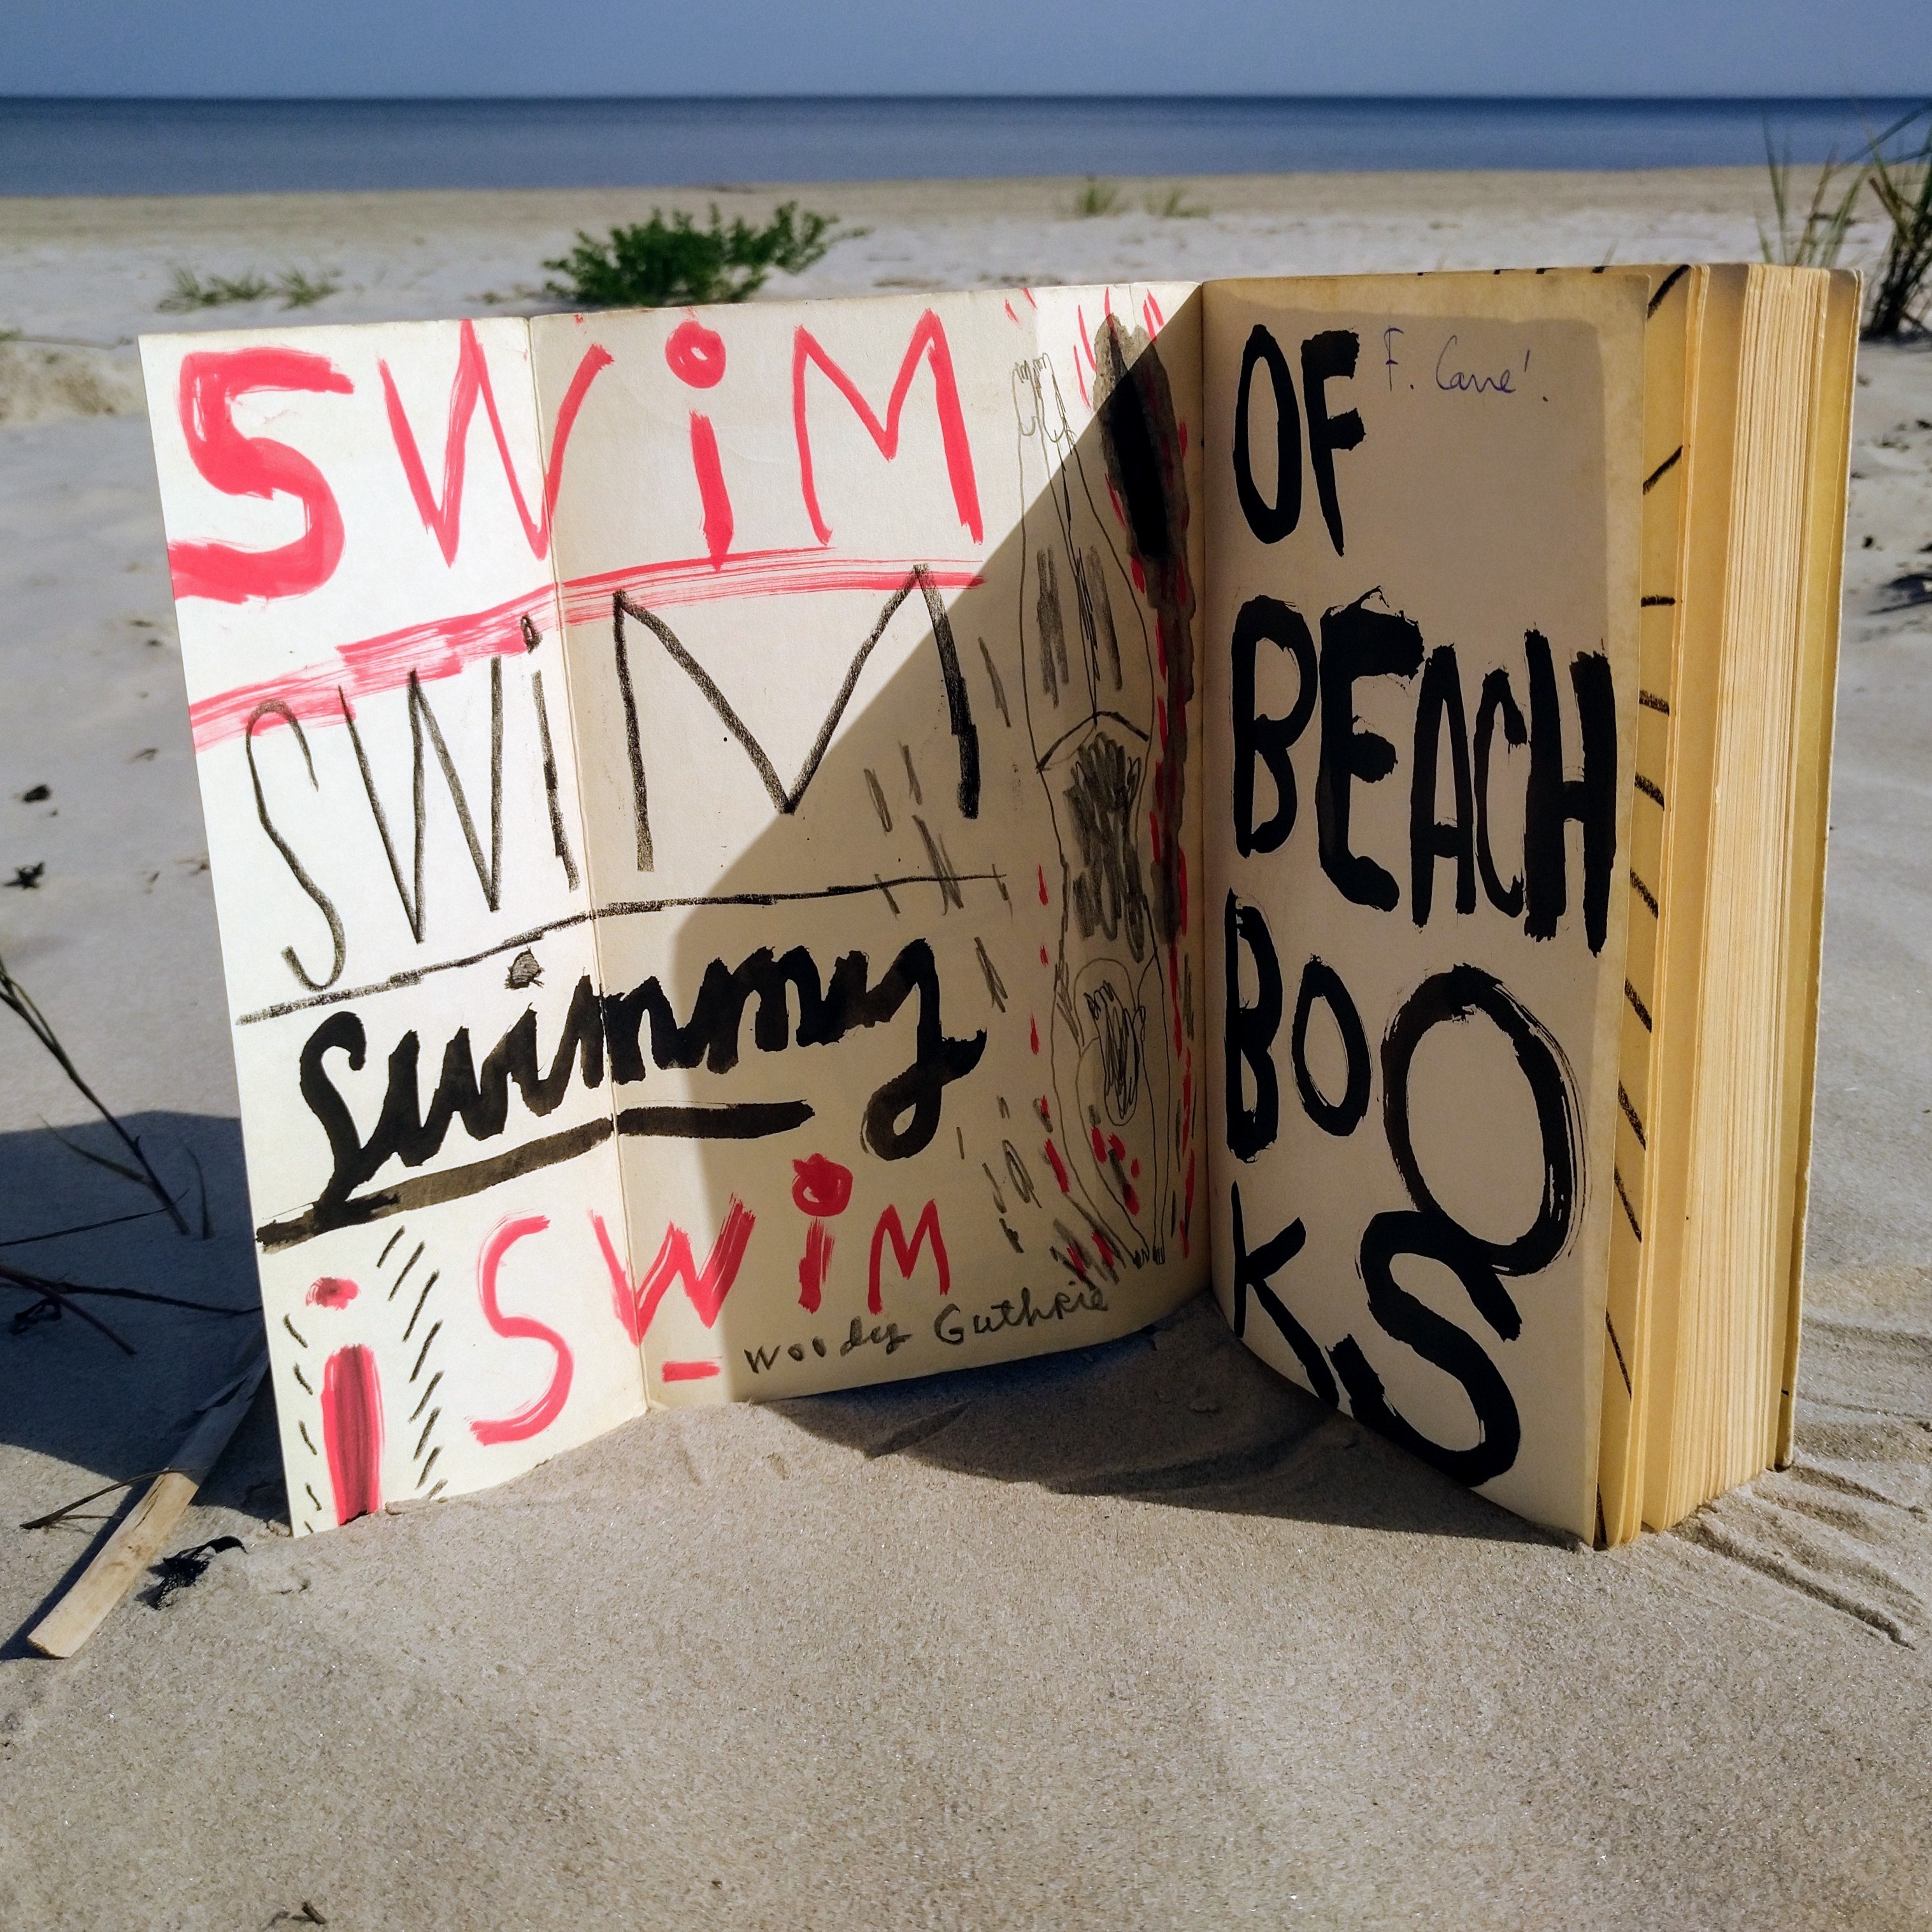 Inside cover of "Les Mots" by Jean Paul Sartre, painted by Jonny Hannah. Gift to the Sea Library. Photo: Beach Books